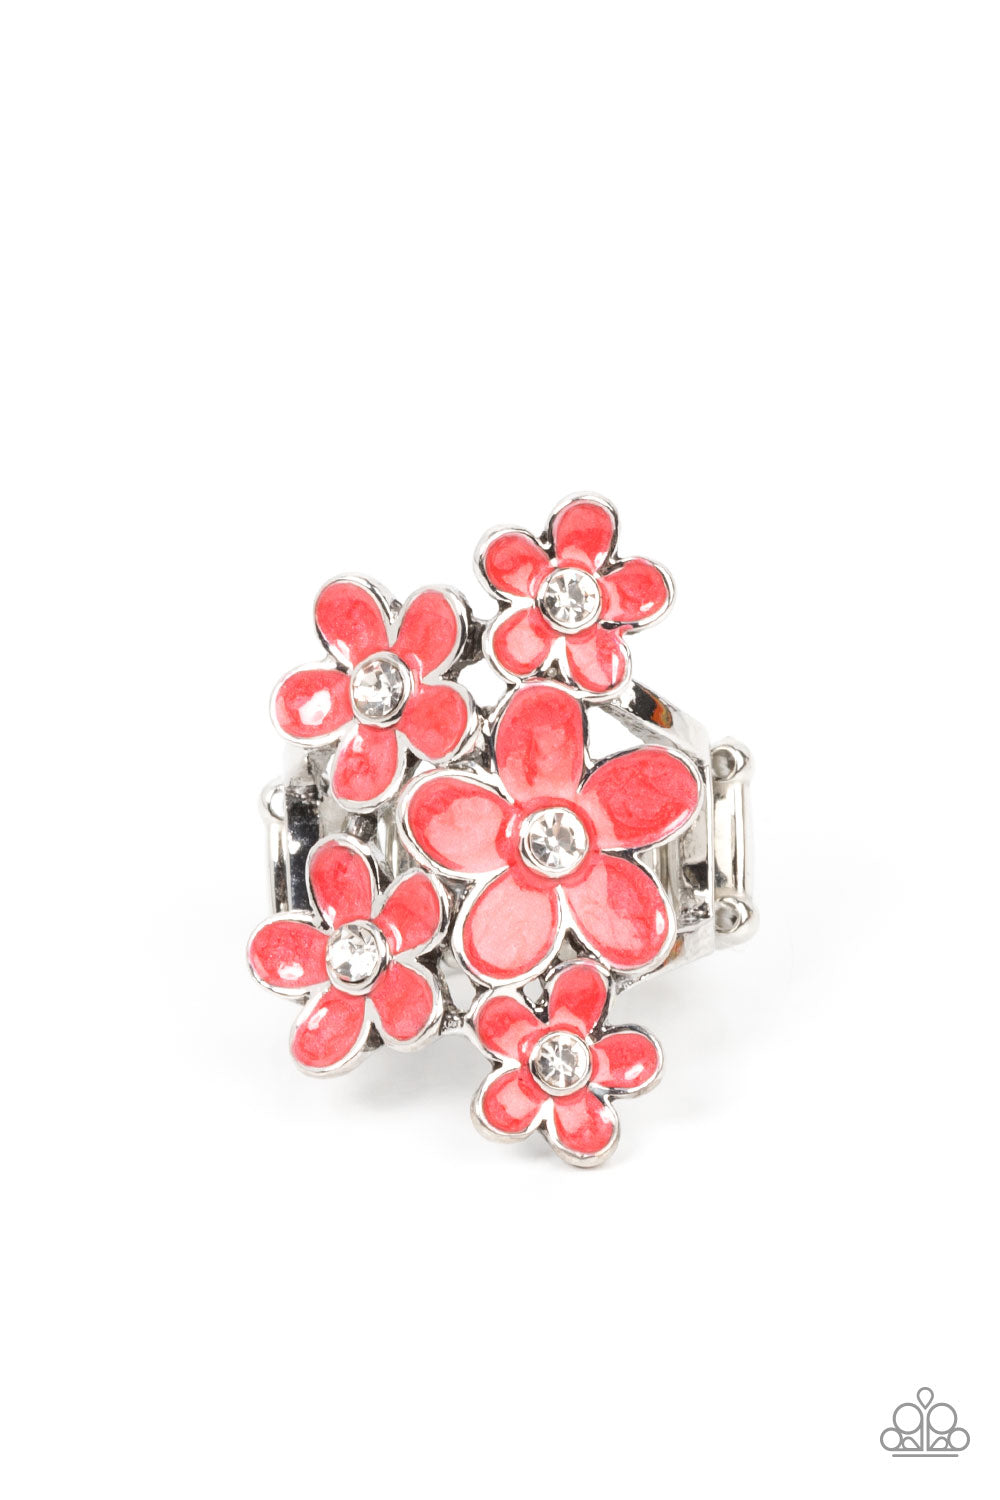 Boastful Blooms Paparazzi Accessories Ring - Red